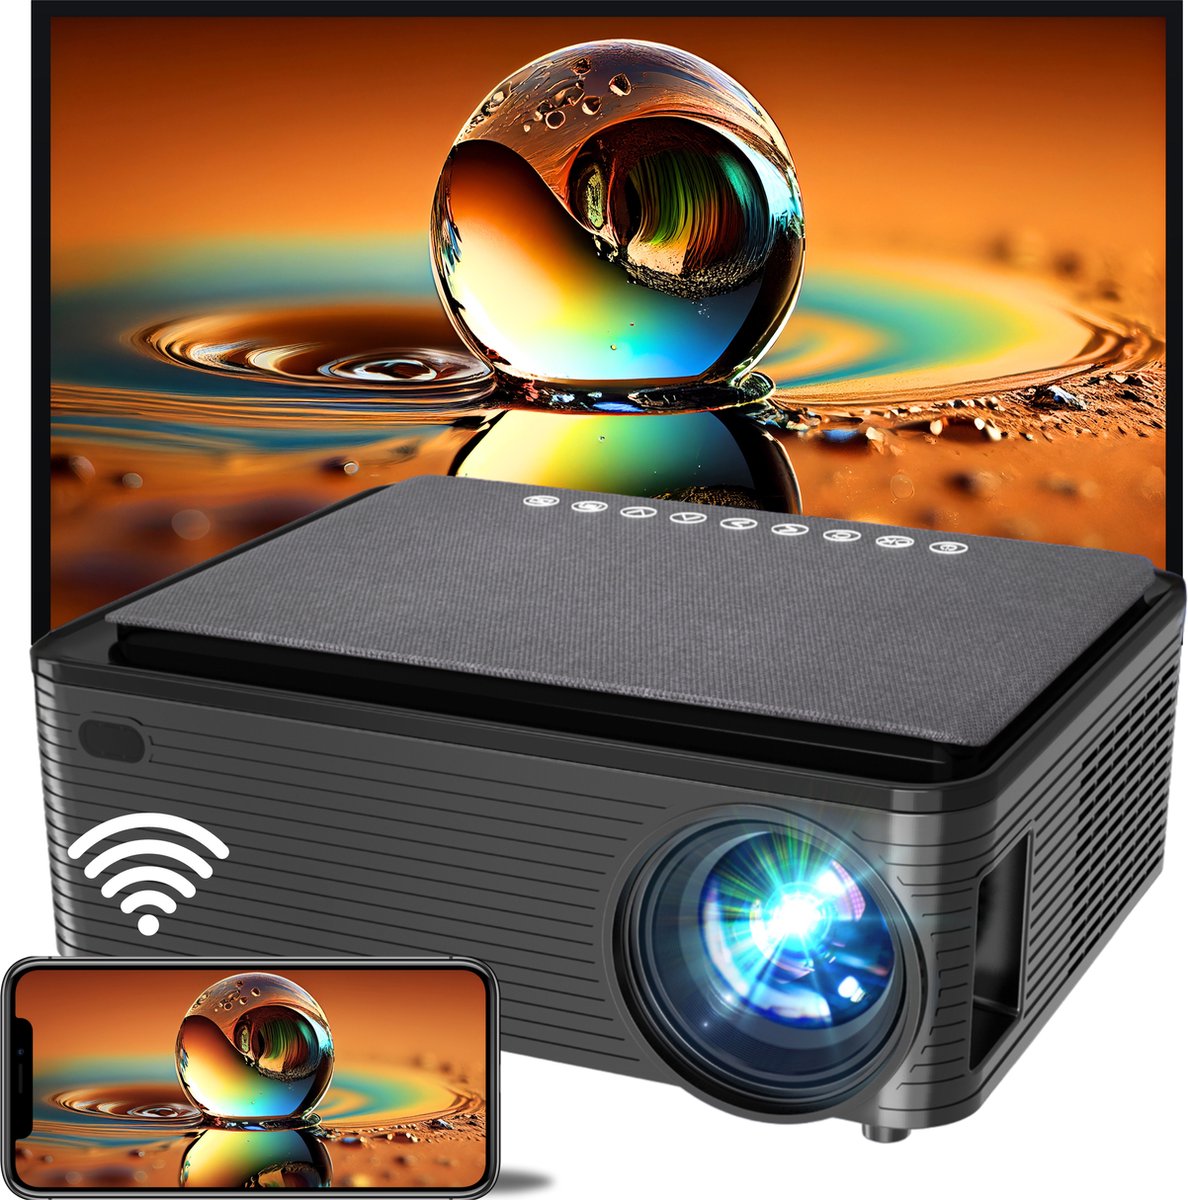 Best Projector for Gaming: Top Picks for an Immersive Gaming Experience